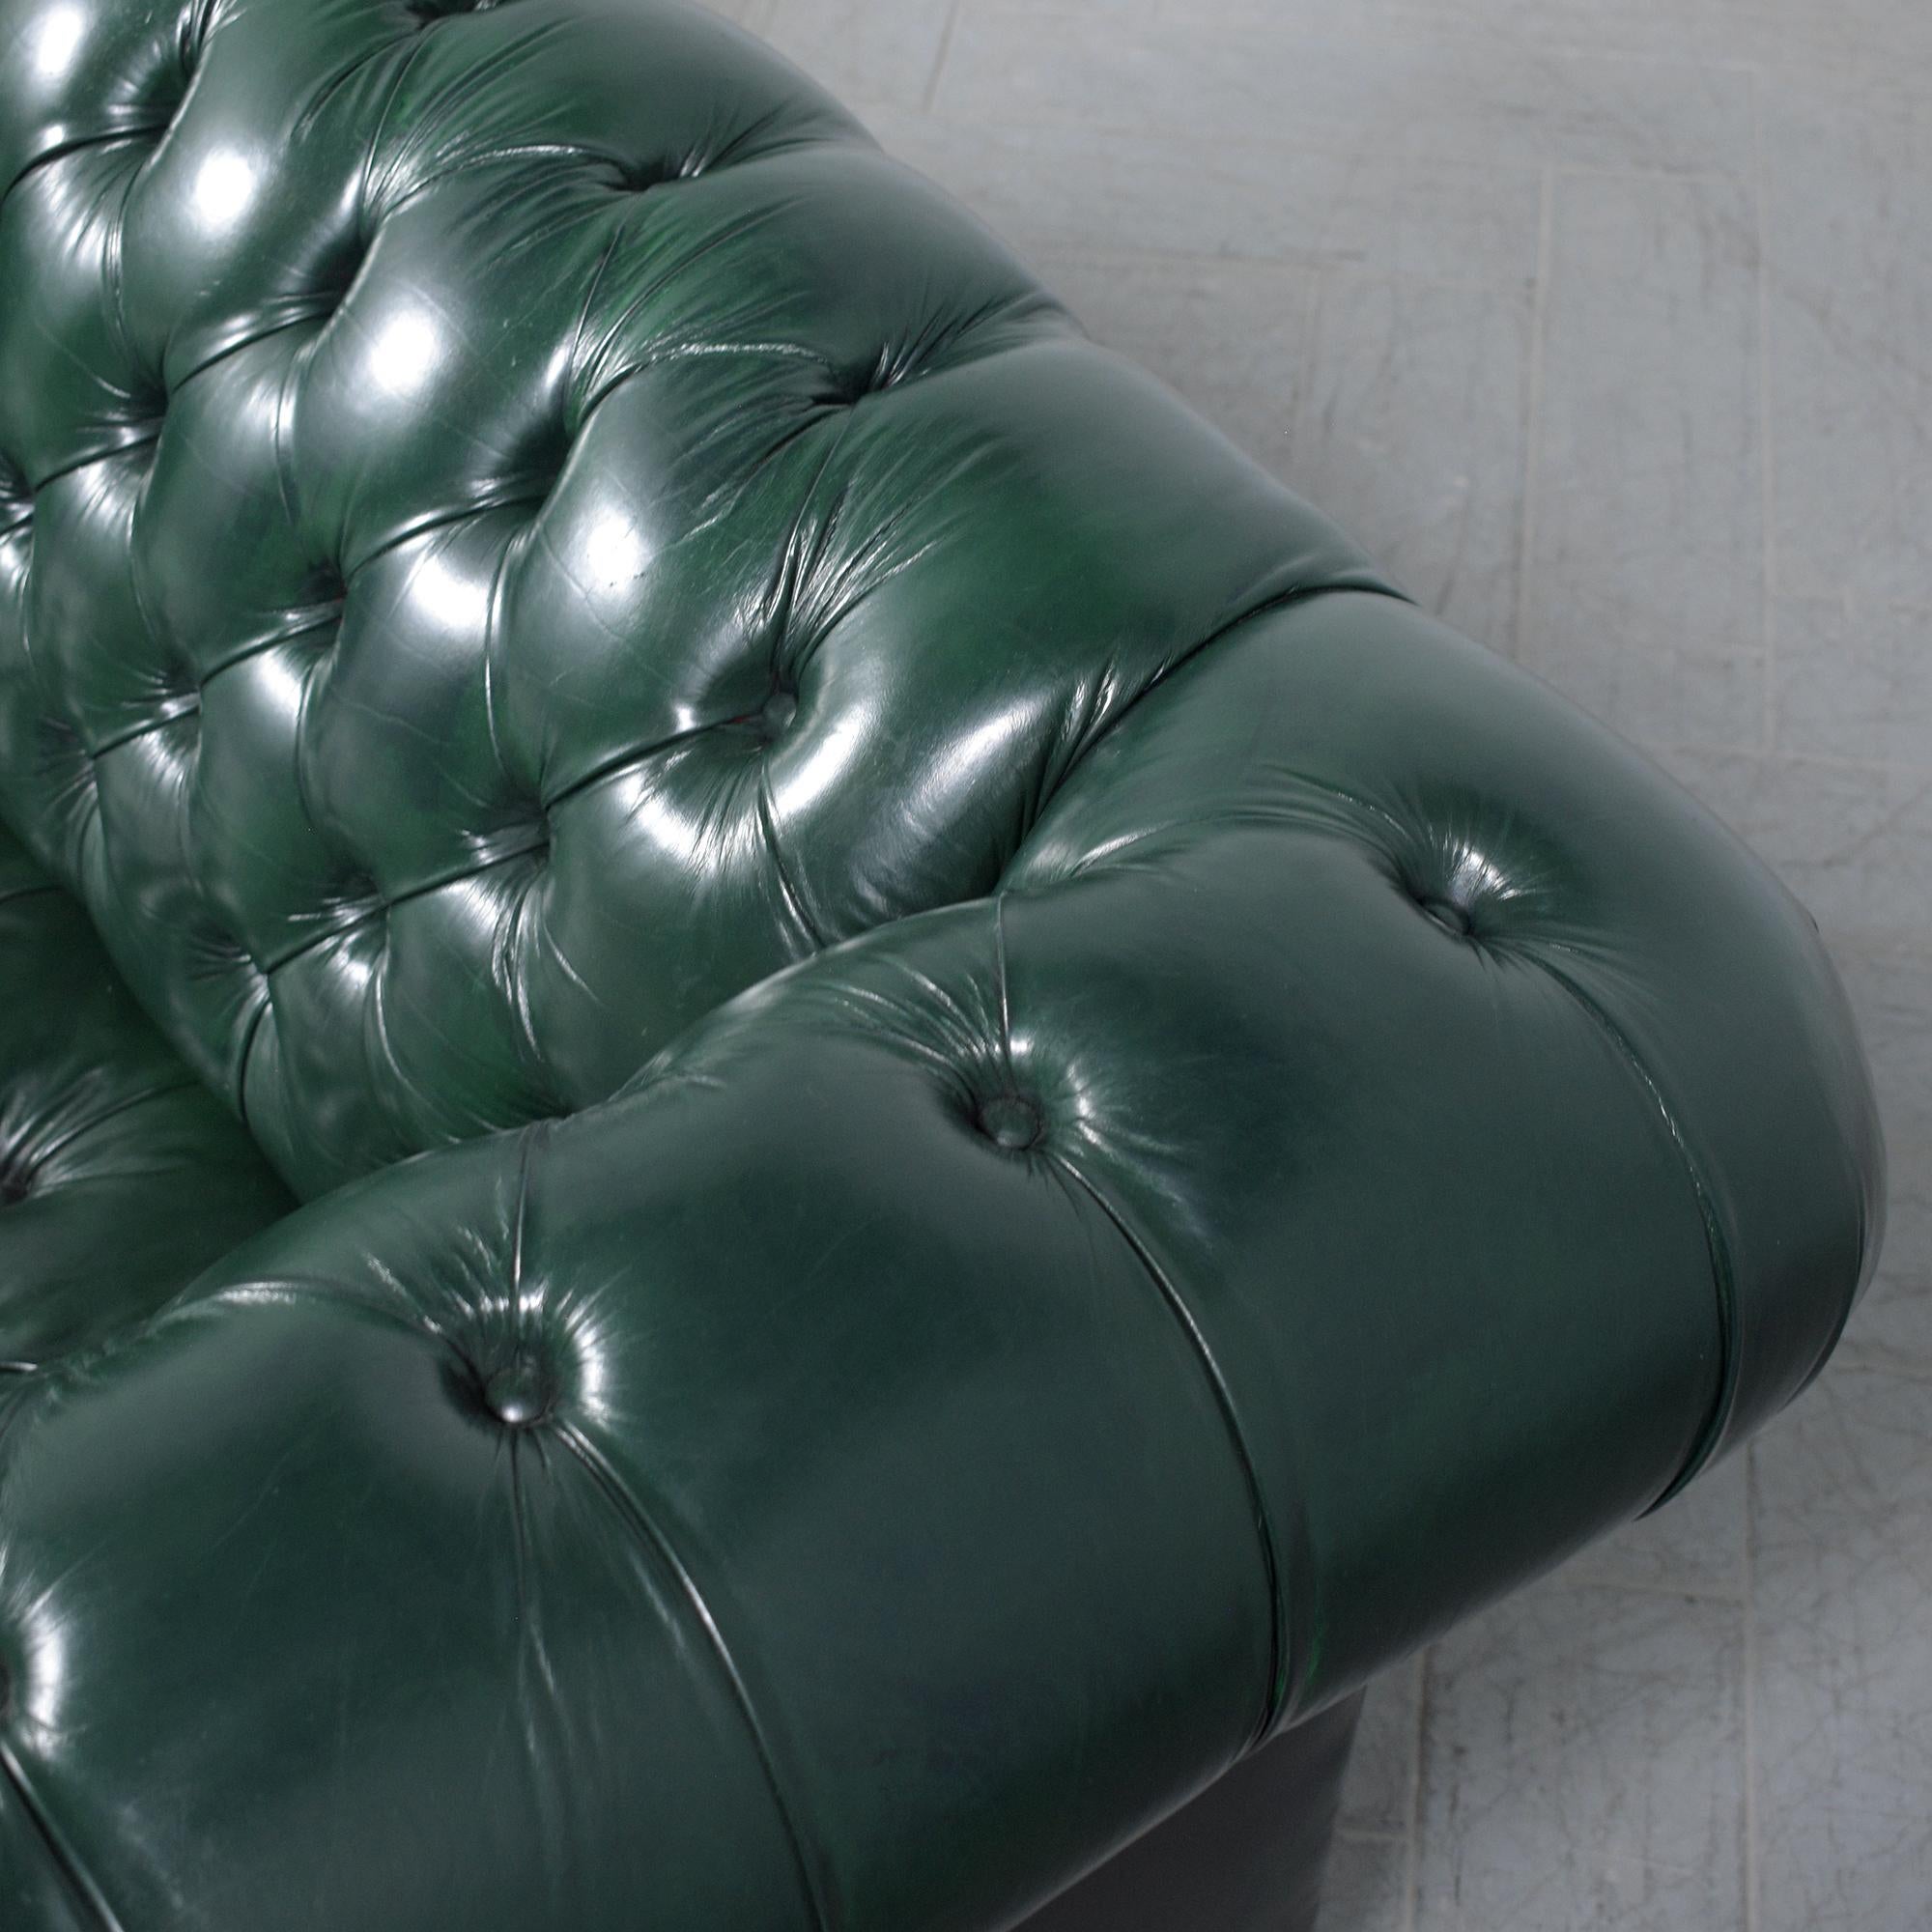 1970s Vintage Chesterfield Sofa: Emerald Green Leather with Elegant Carved Legs 2